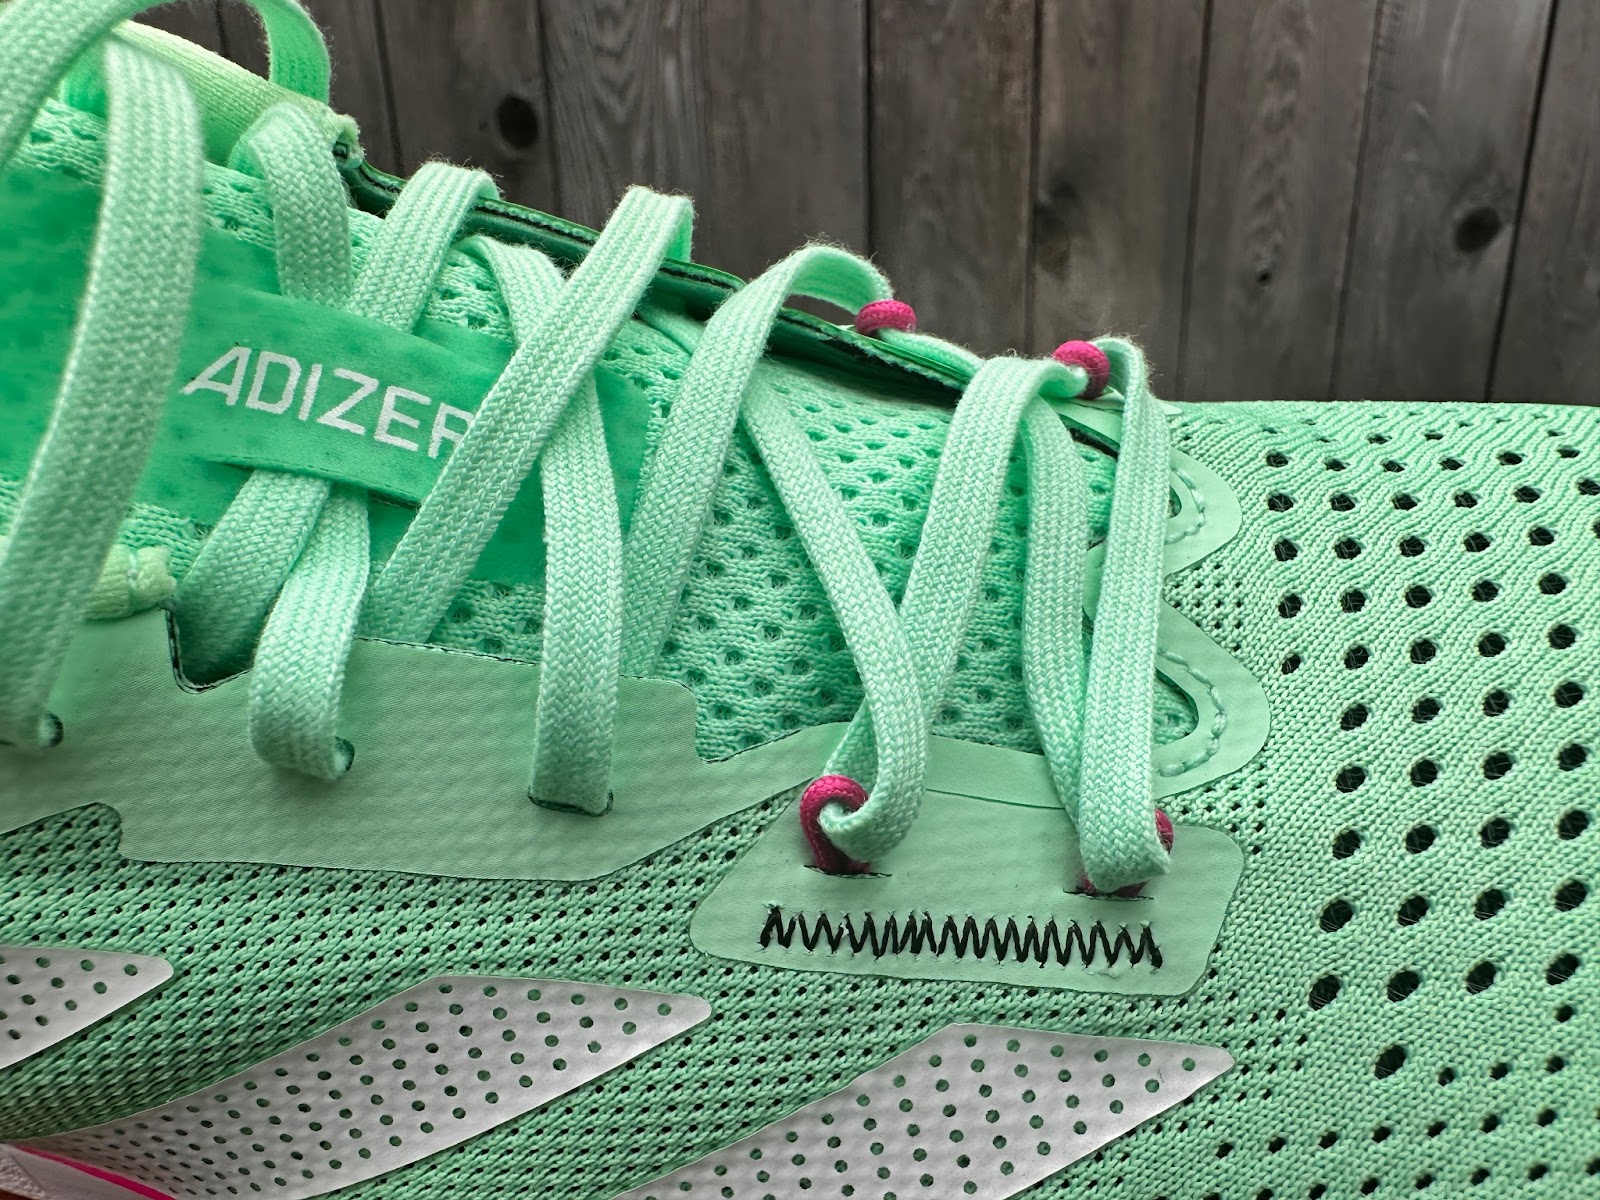 Adidas Adizero SL Review: Versatile and Affordable Daily Trainer